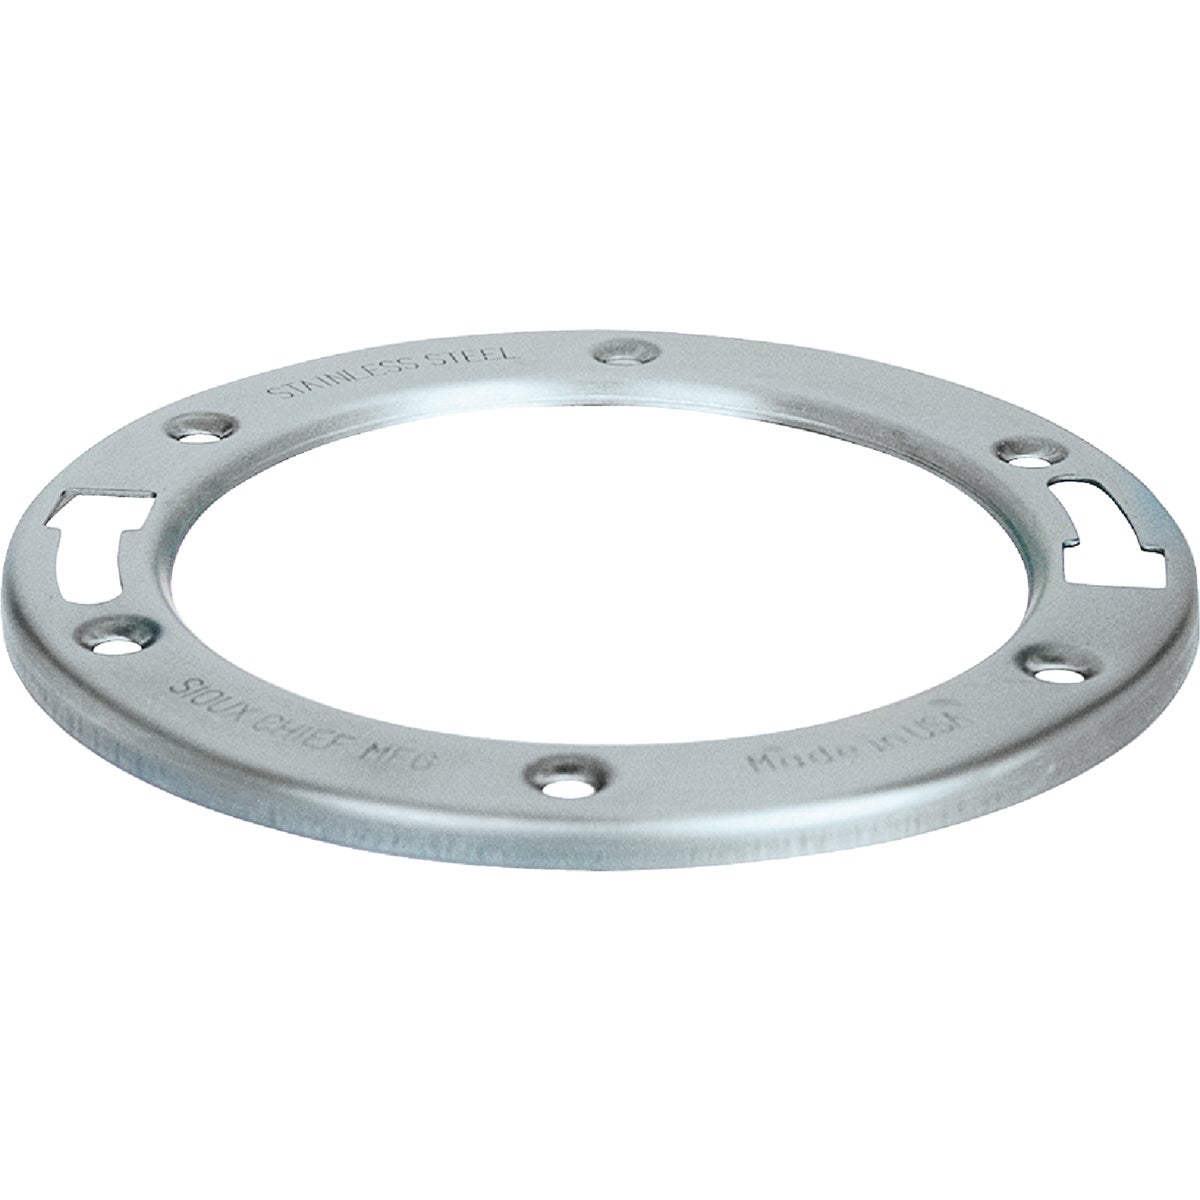 Sioux Chief Ringer Stainless Steel Toilet Flange Ring